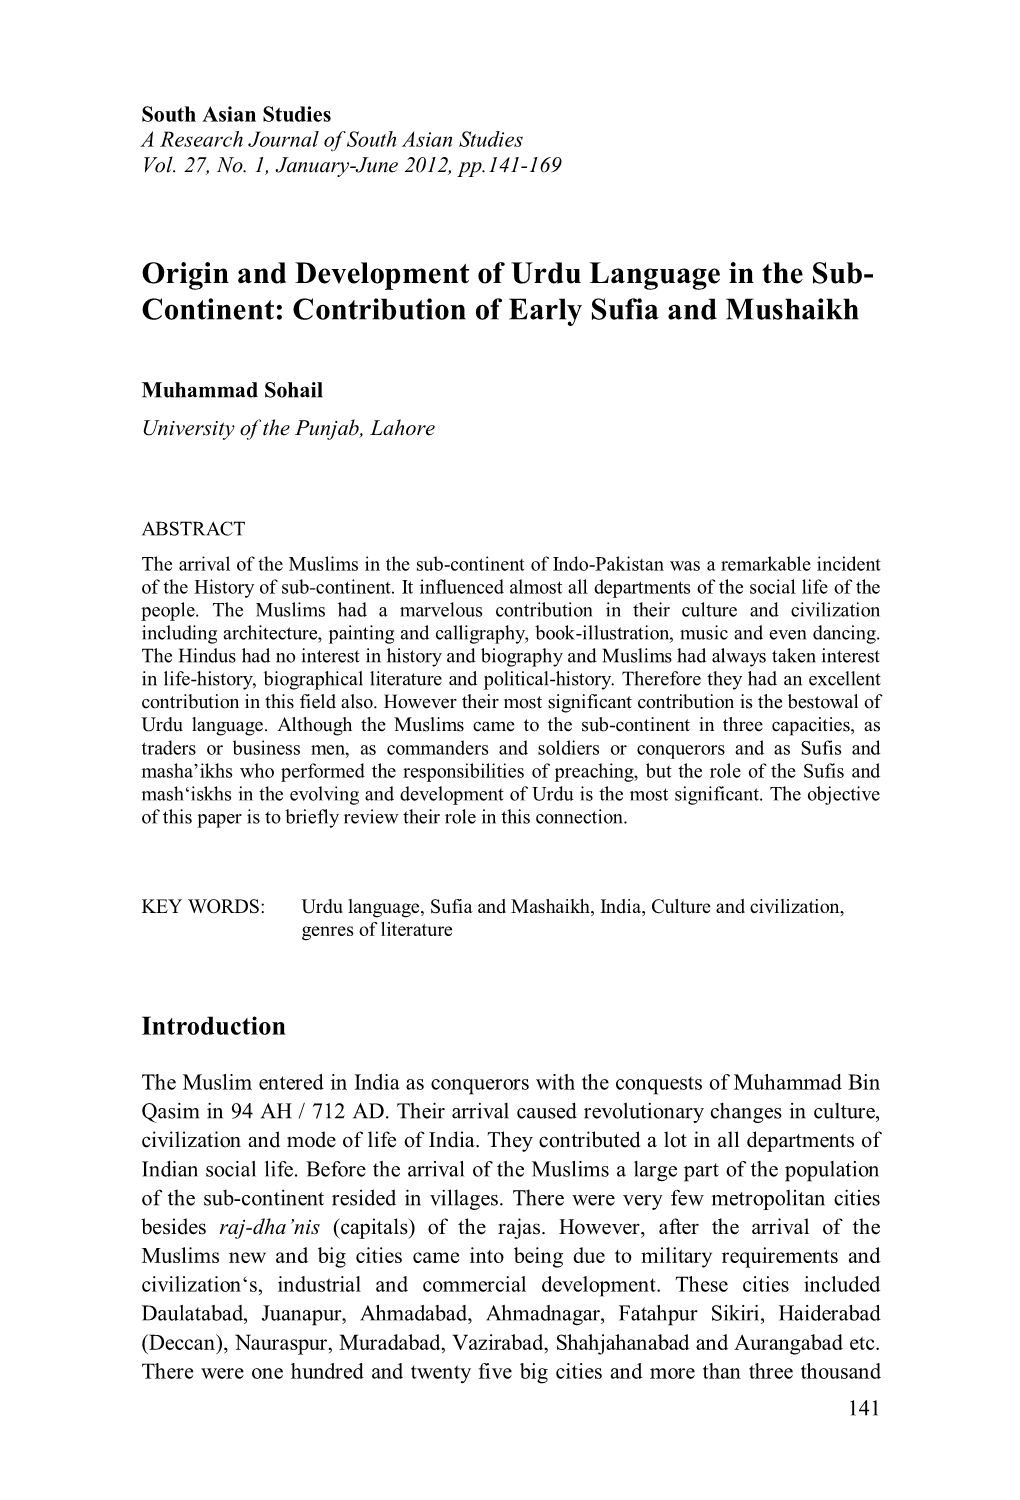 Origin and Development of Urdu Language in the Sub- Continent: Contribution of Early Sufia and Mushaikh